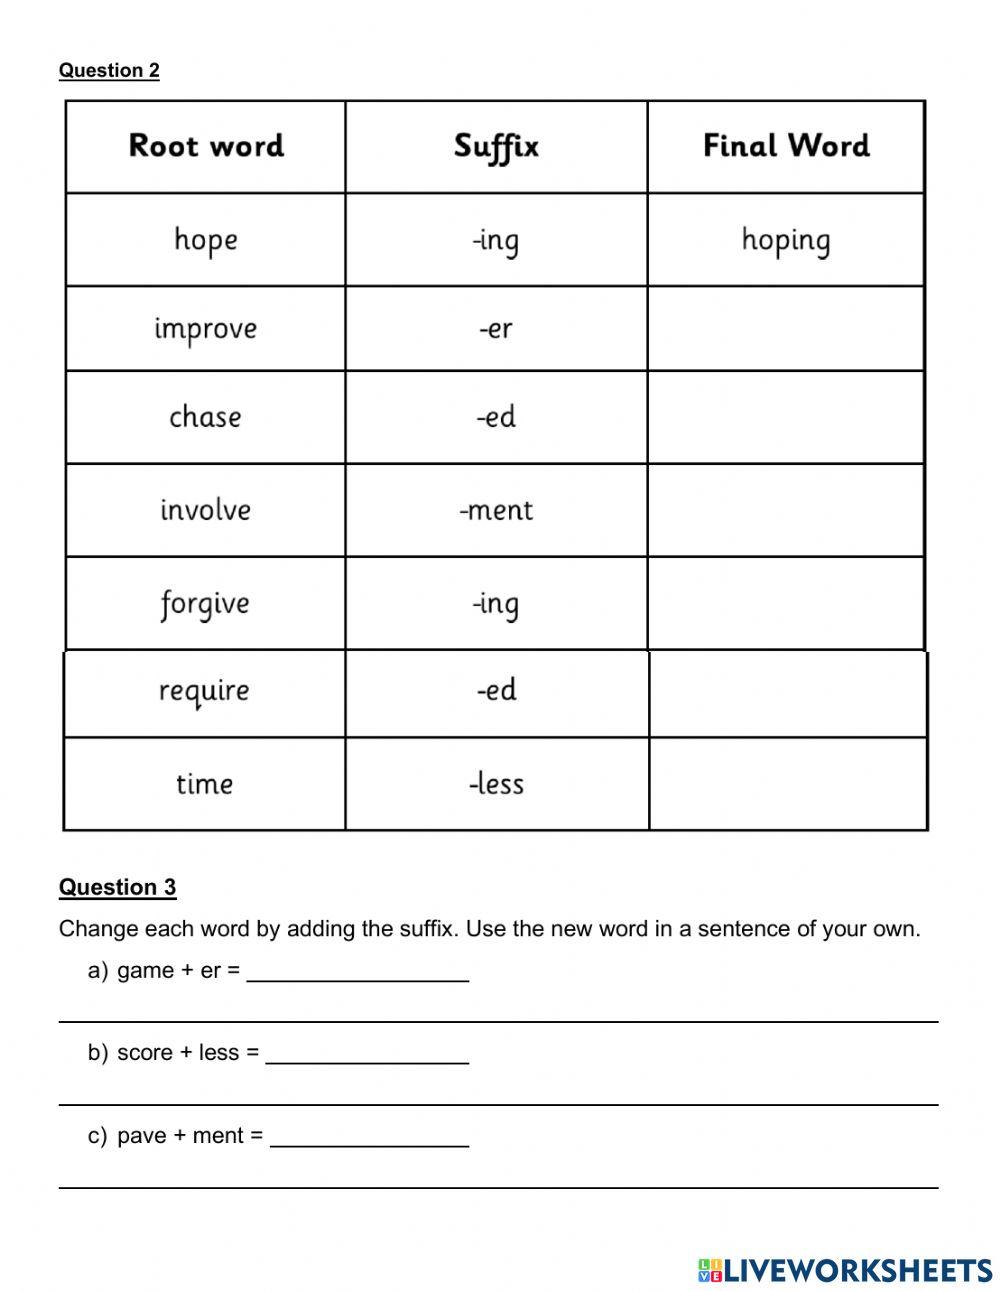 DIS English Term 1 Week 2 Lesson 1 and 2